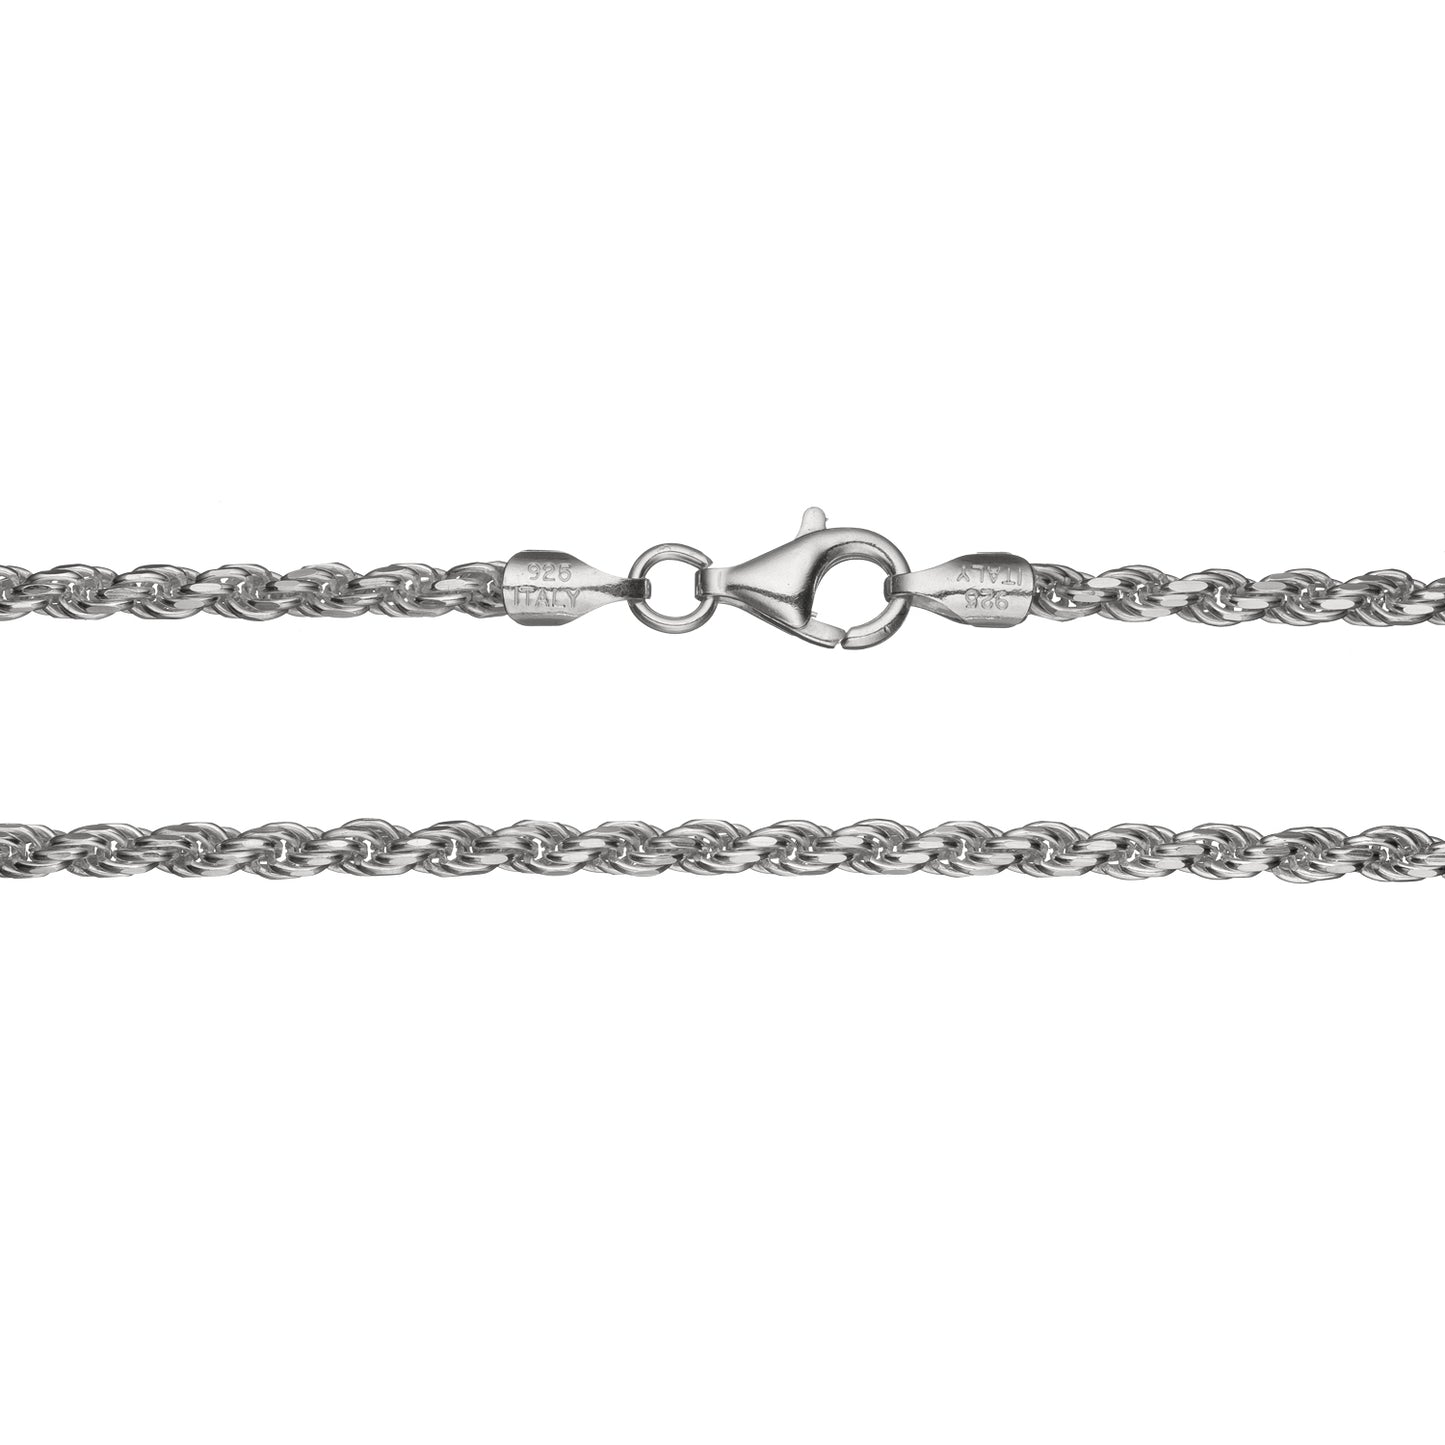 925 Sterling Silver 2.75mm Italian Rope Chain Necklace | 16"-30"